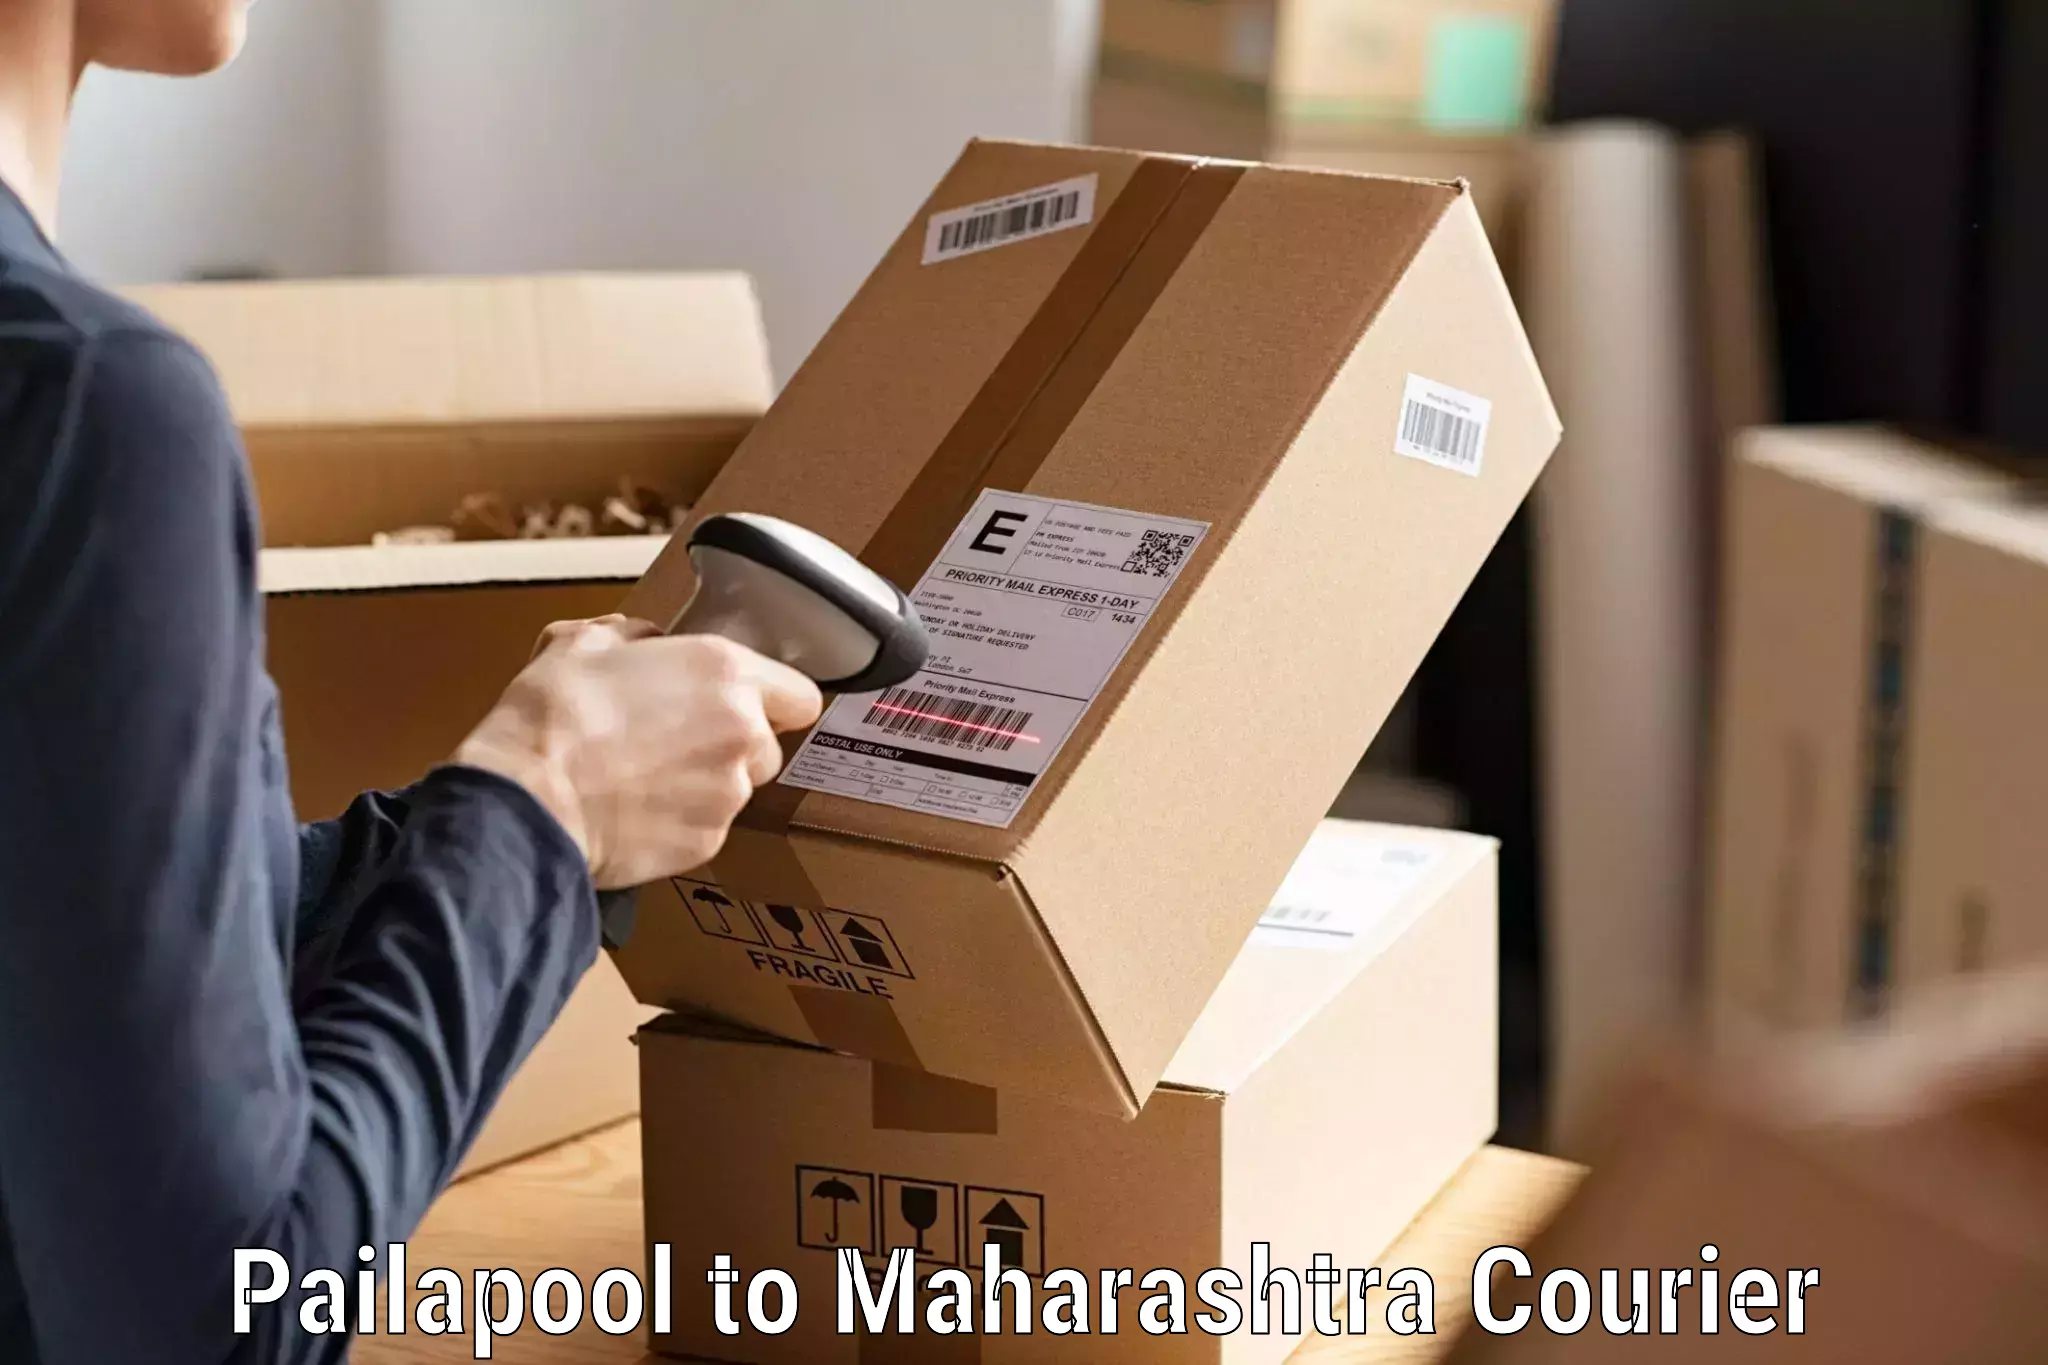 24-hour courier service Pailapool to Yeola